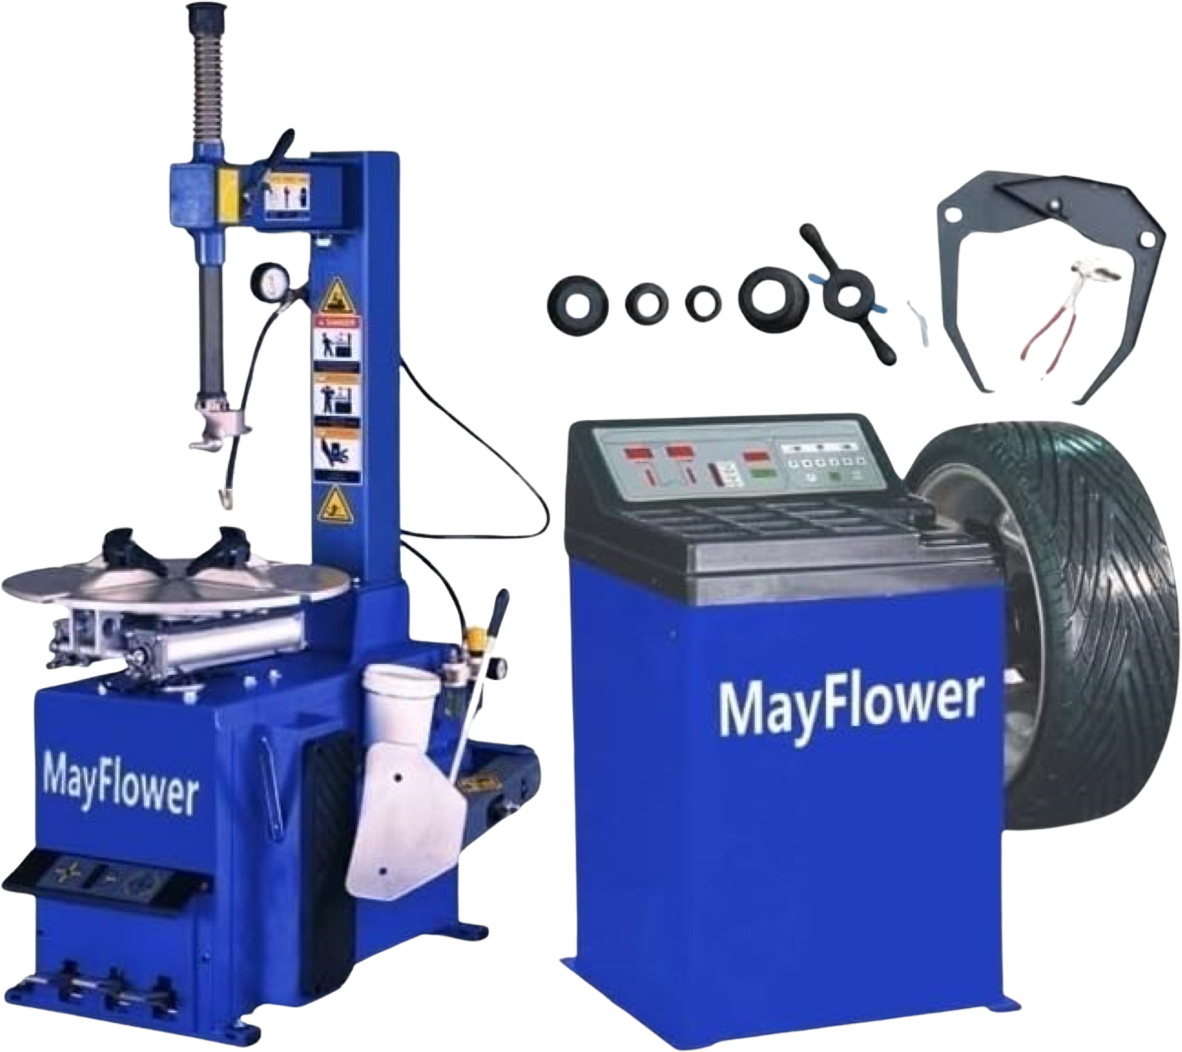 Mayflower Tools 560+680 Tire Changer 1.5 HP and Wheel Balancer Combo New